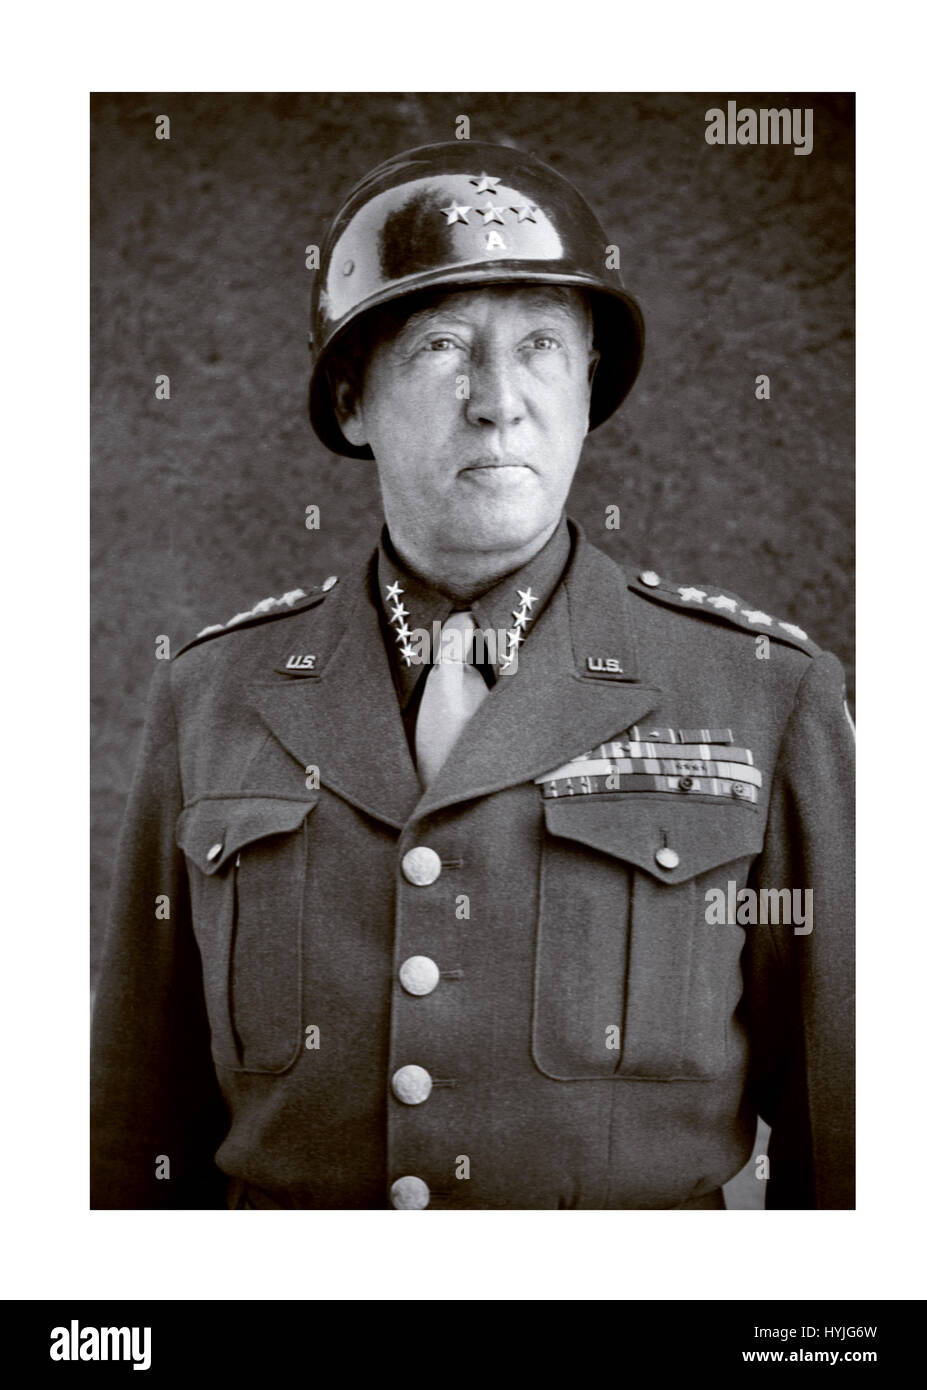 General George Smith Patton Jr. (November 11, 1885 – December 21, 1945) was a senior officer of the United States Army who commanded the U.S. Seventh Army in the Mediterranean and European theaters of World War II, but is best known for his leadership of the U.S. Third Army in France and Germany following the Allied invasion of Normandy in June 1944. Stock Photo